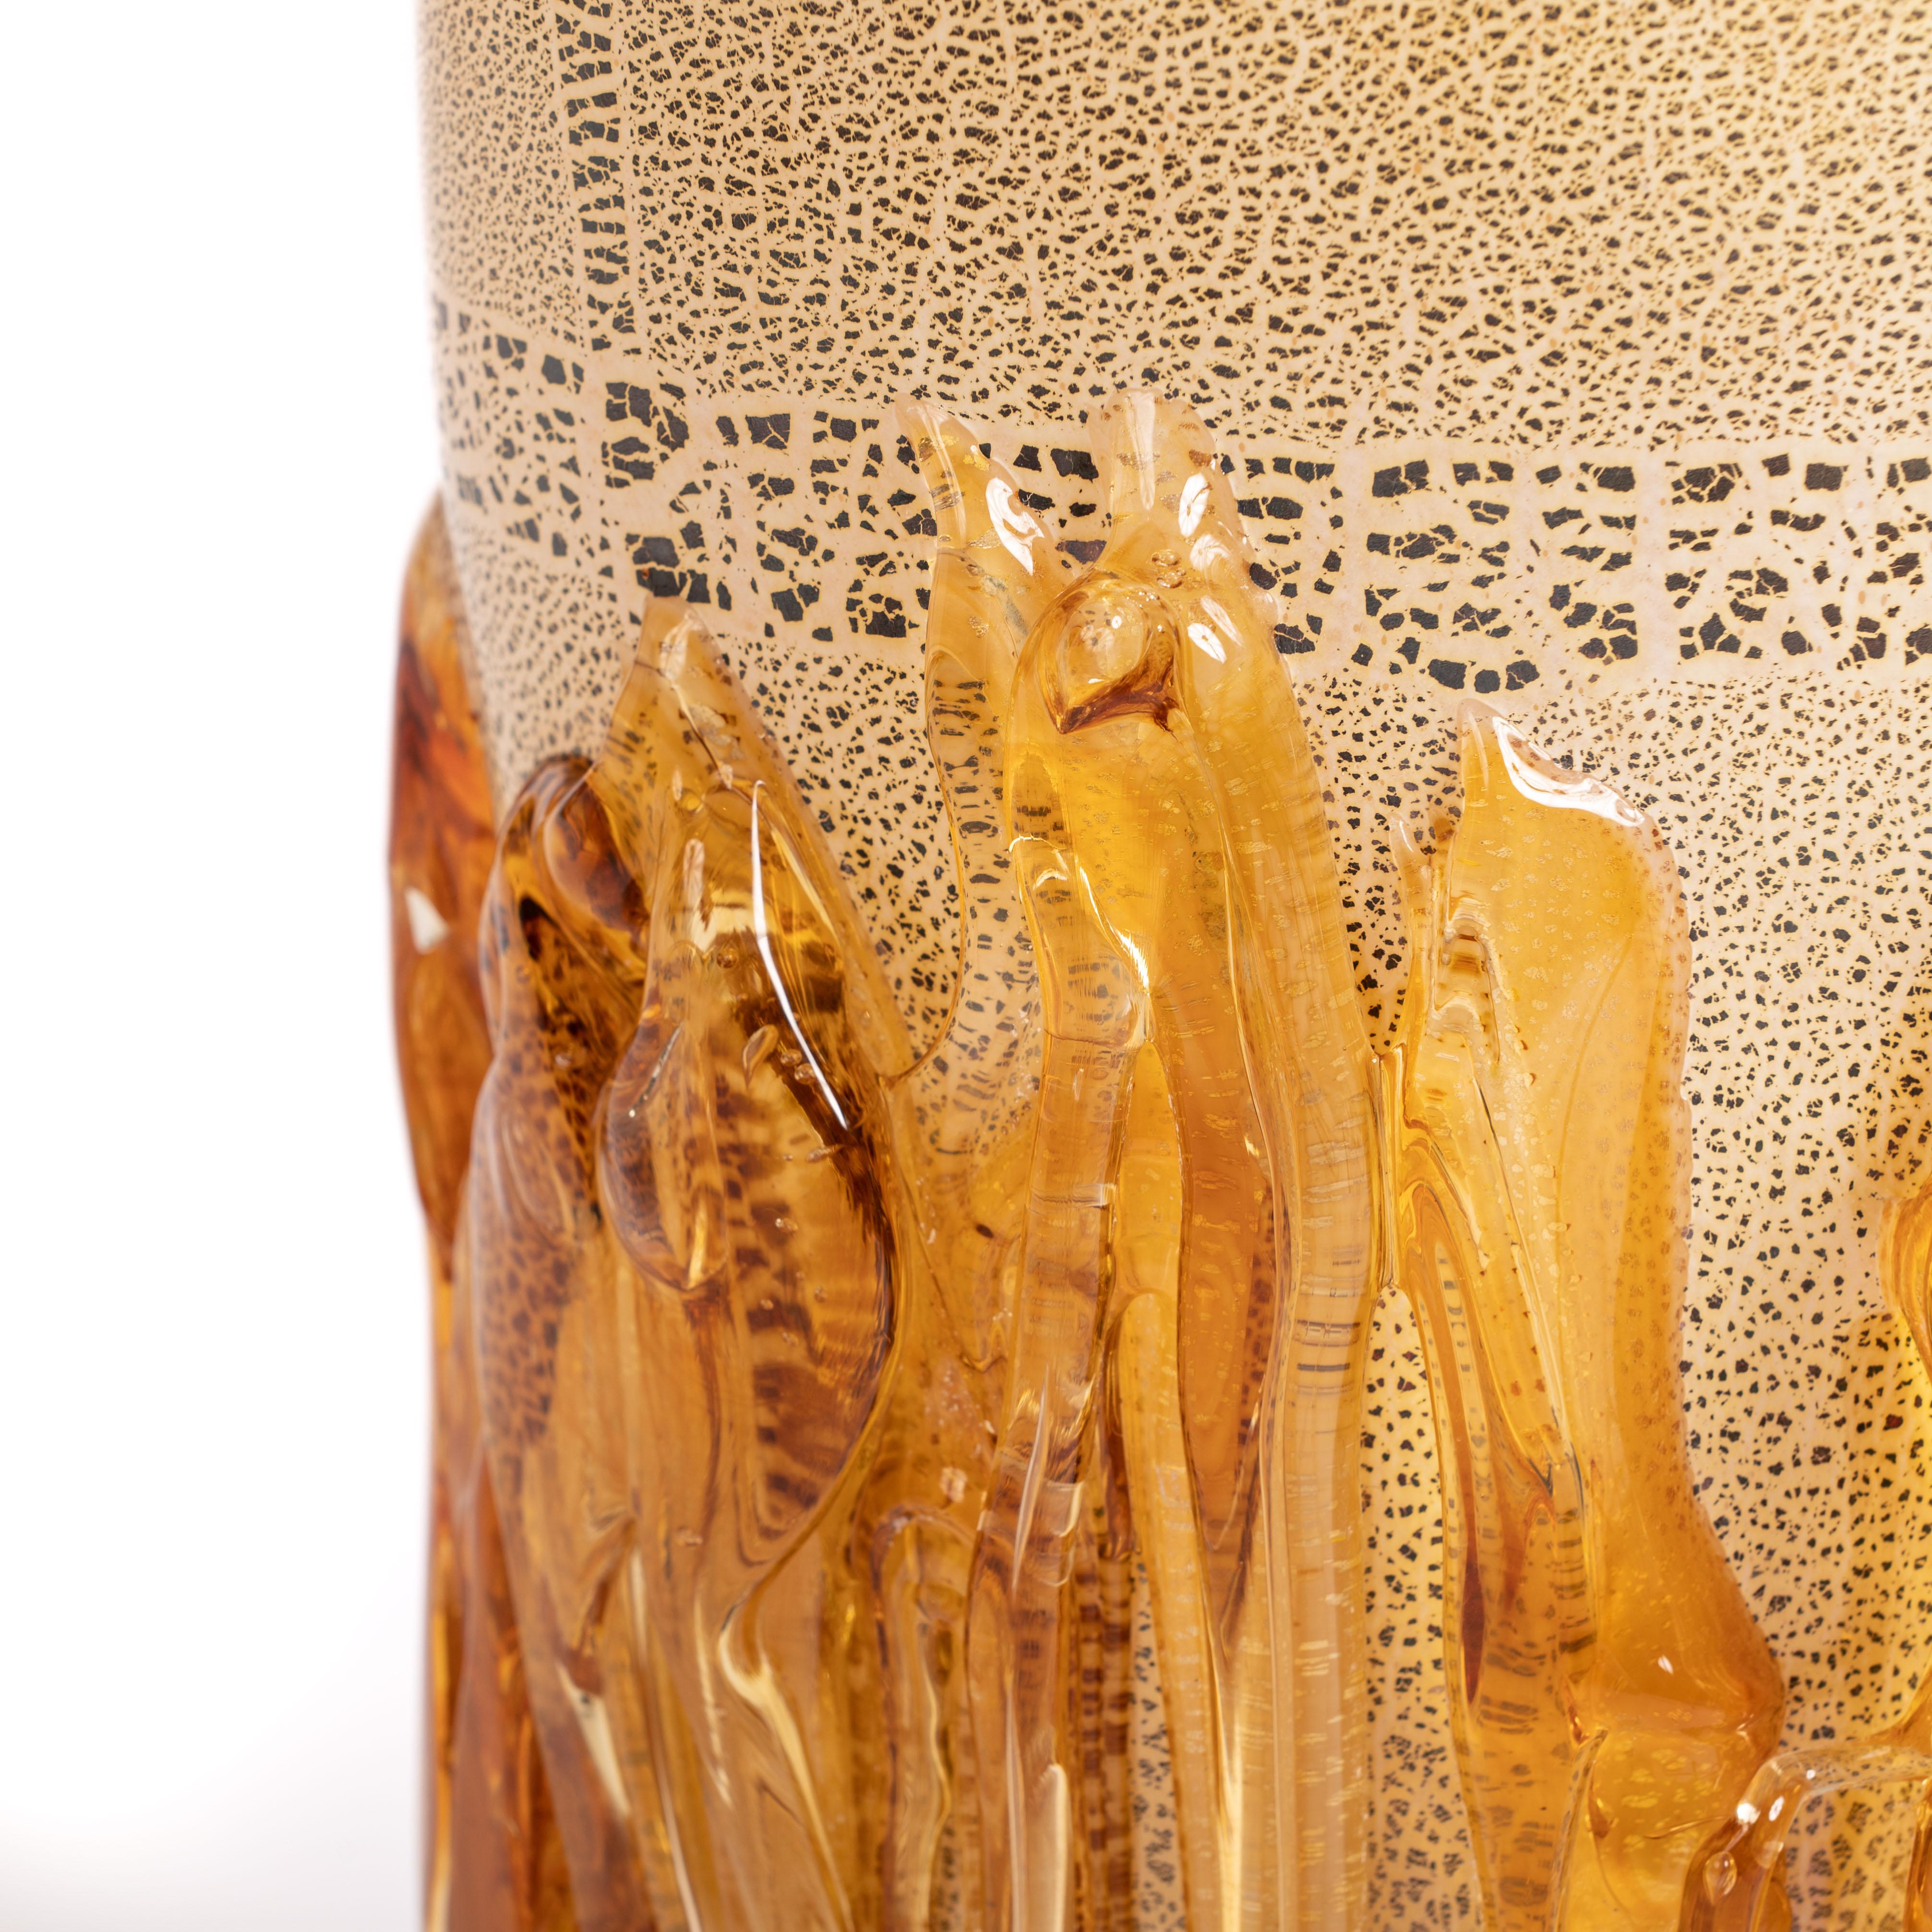 Modern Murano Glass Vase in Gold-Amber Color signed by Hand, Italy 2015 For Sale 1